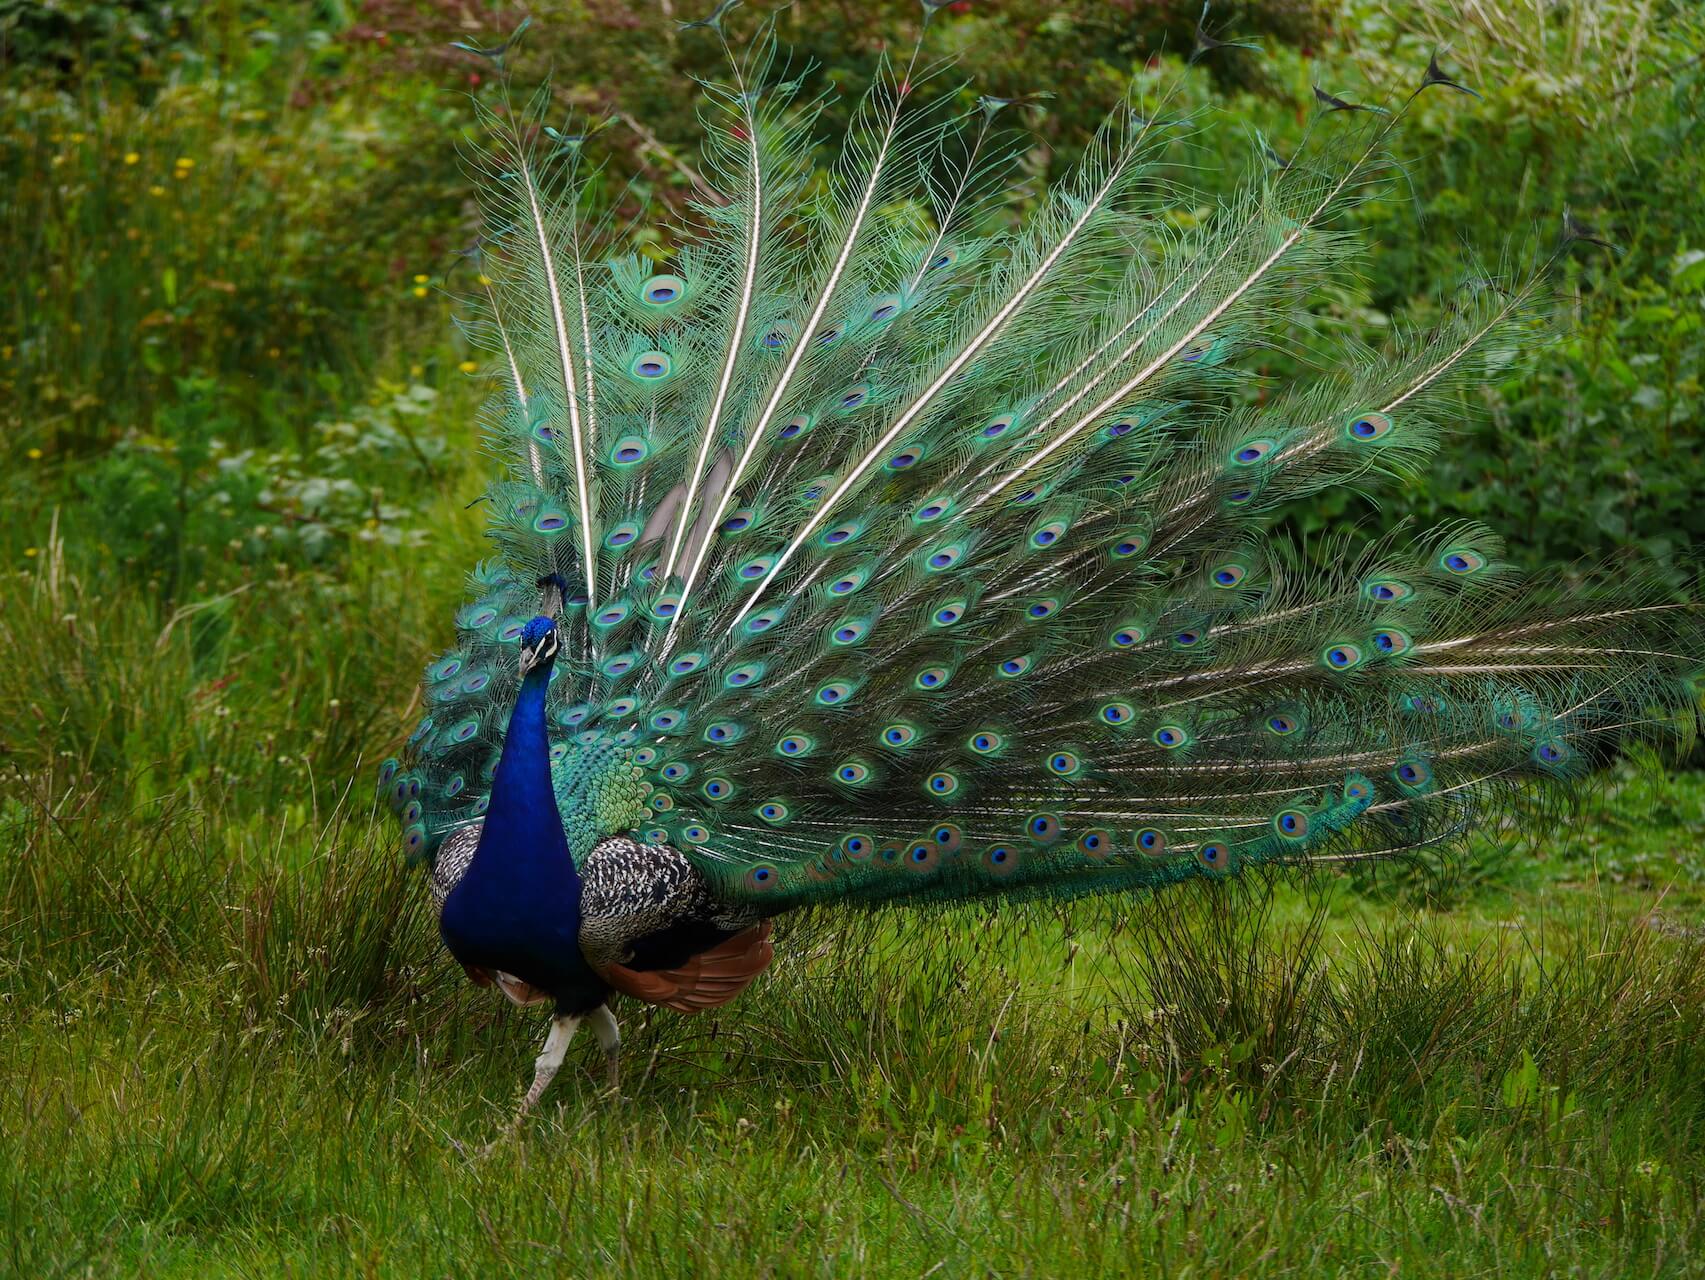 Peacock showing off feathers, Isle of Arran